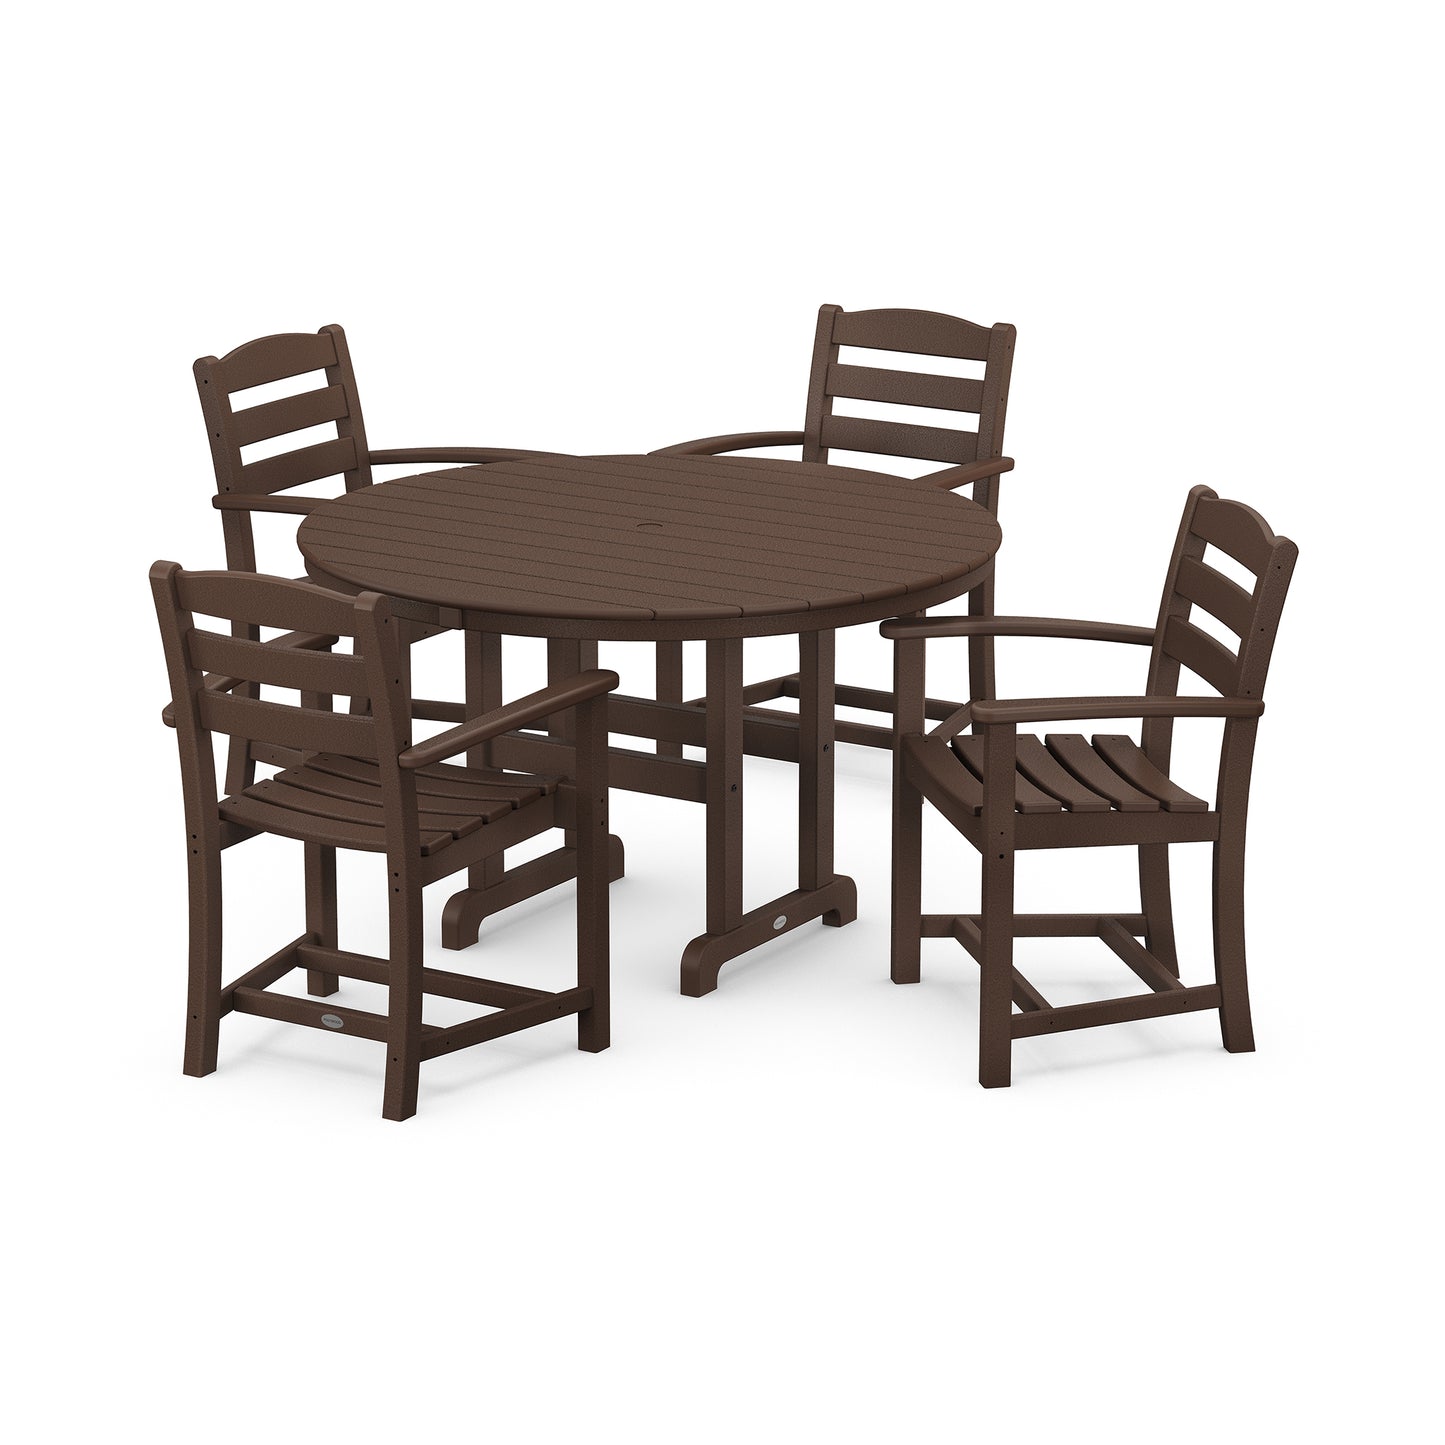 A round brown POLYWOOD® La Casa Café 5-Piece Dining Set with four matching chairs set on a plain white background. The chairs and table have a simple, contemporary design.